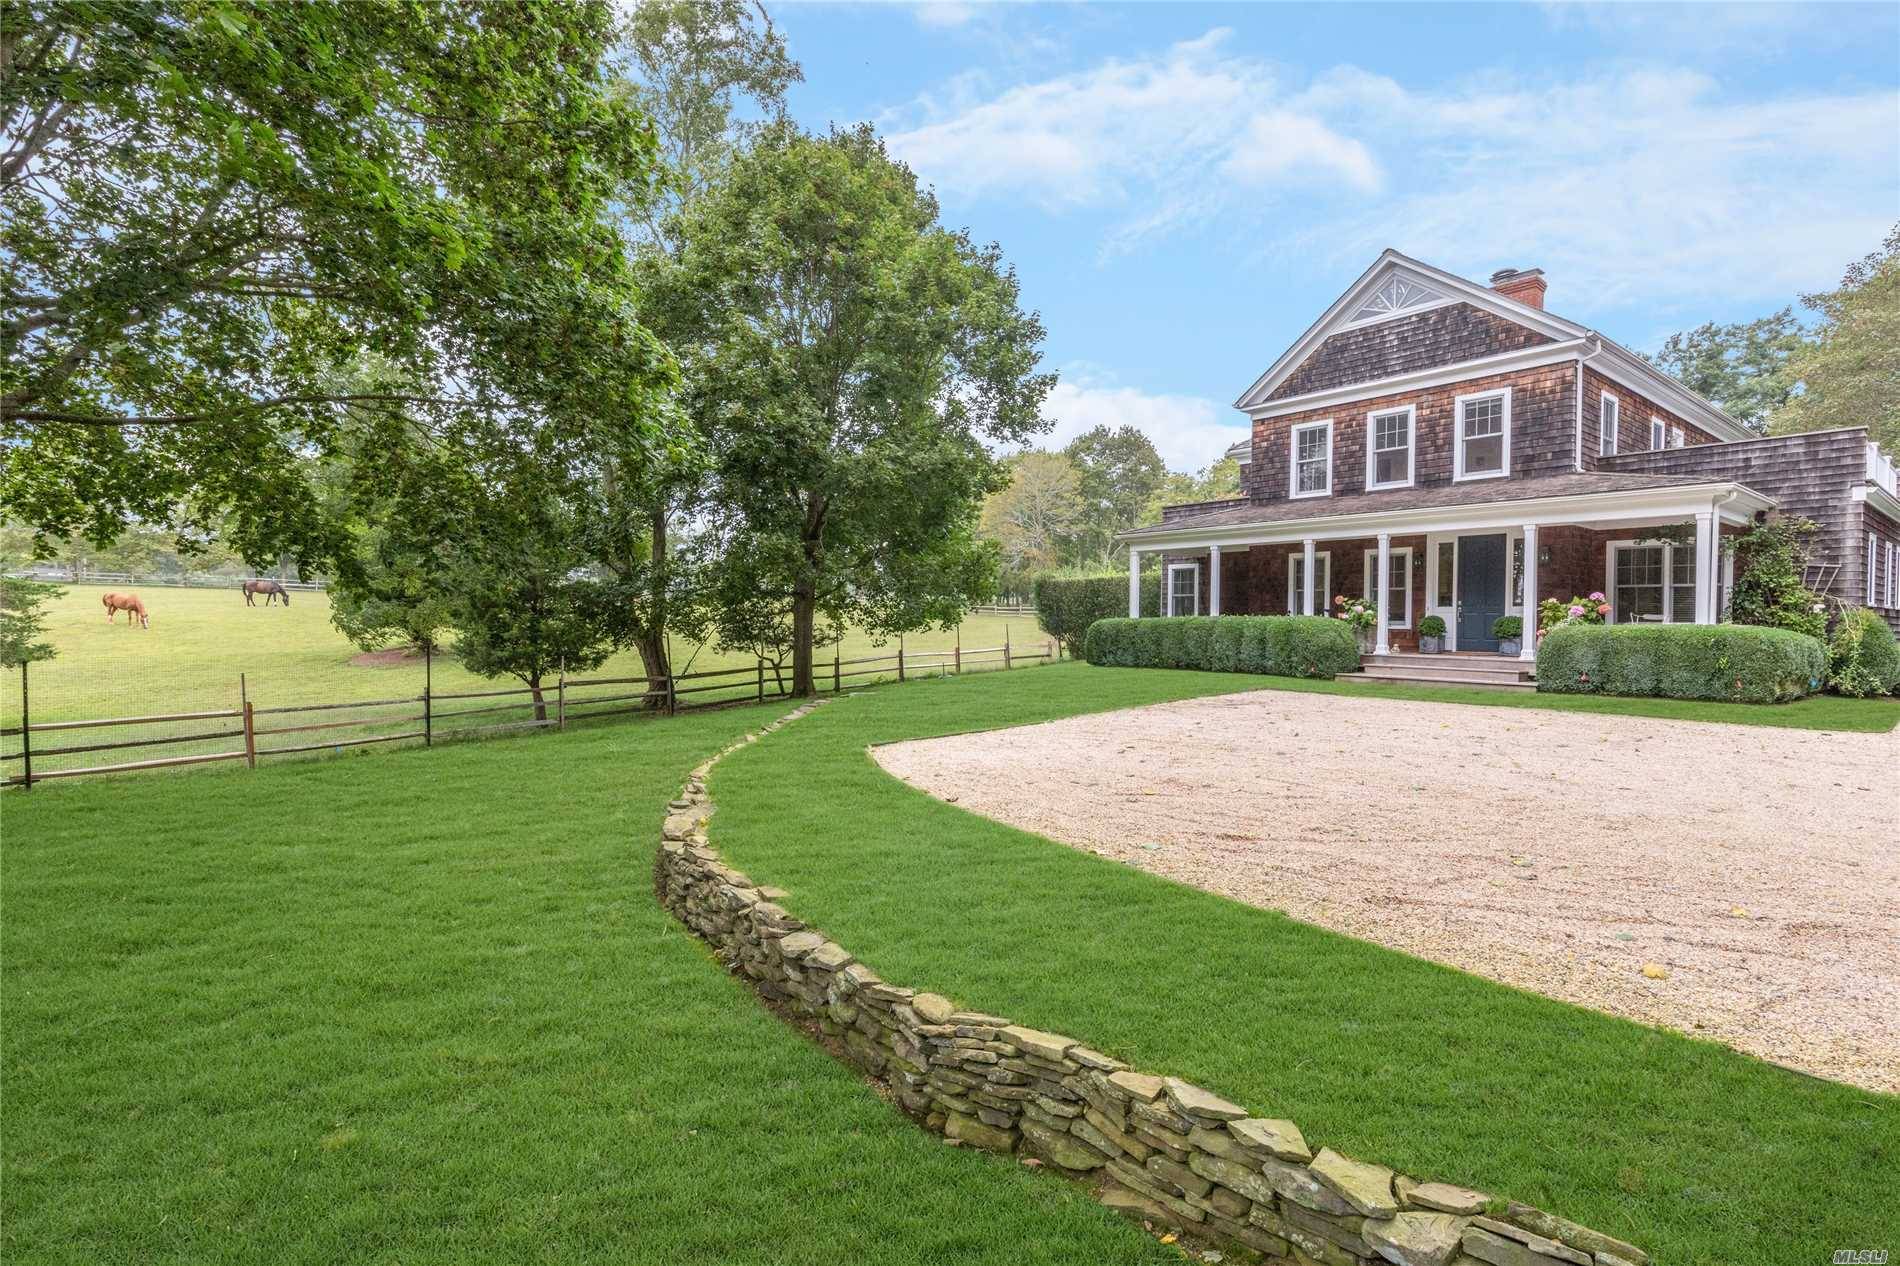 Published in the New York Times, this exquisite country retreat overlooks acres of farmland in Southampton North estate area.